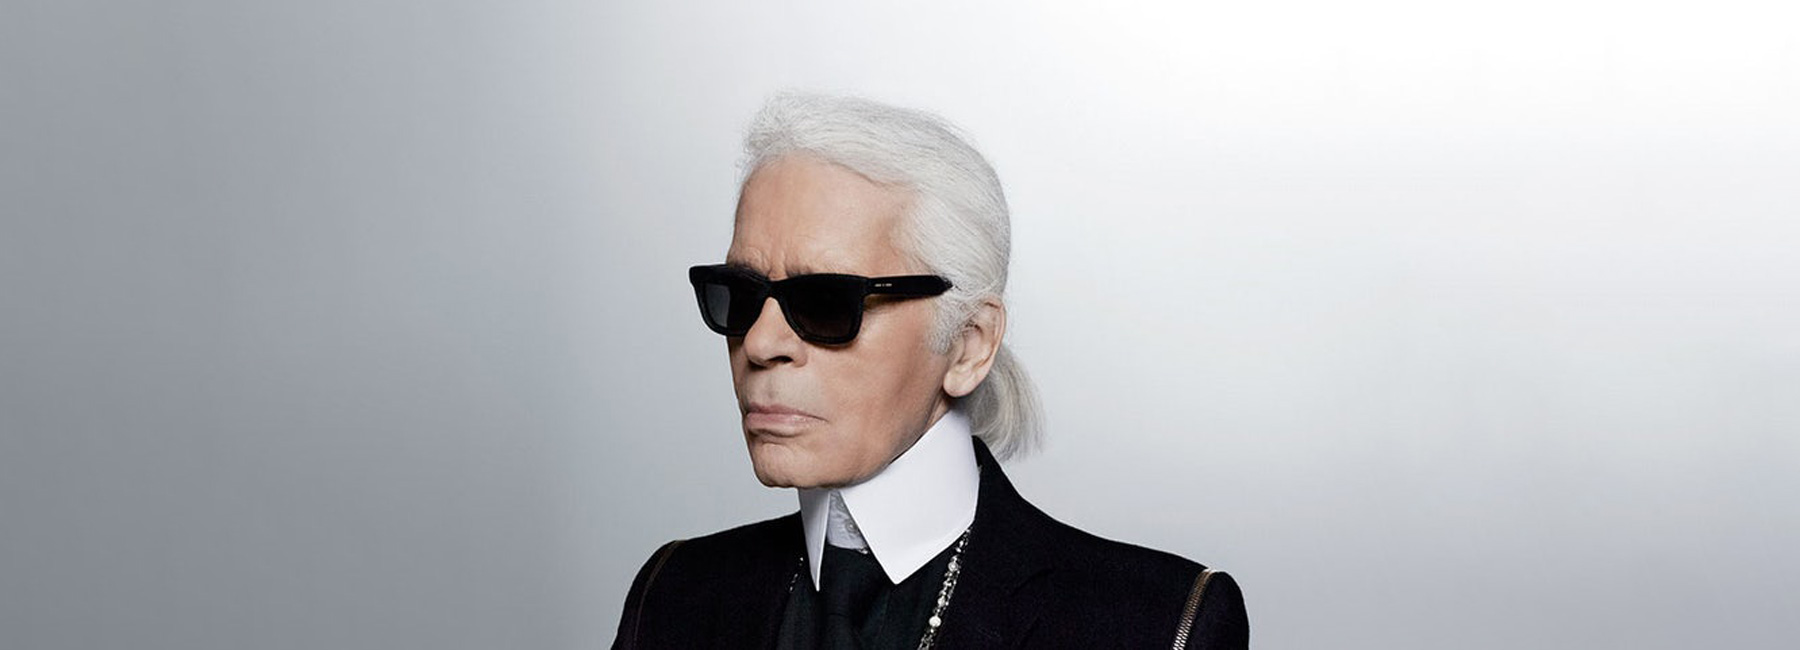 Karl Lagerfeld Interviewed An Astronaut For His Fashion